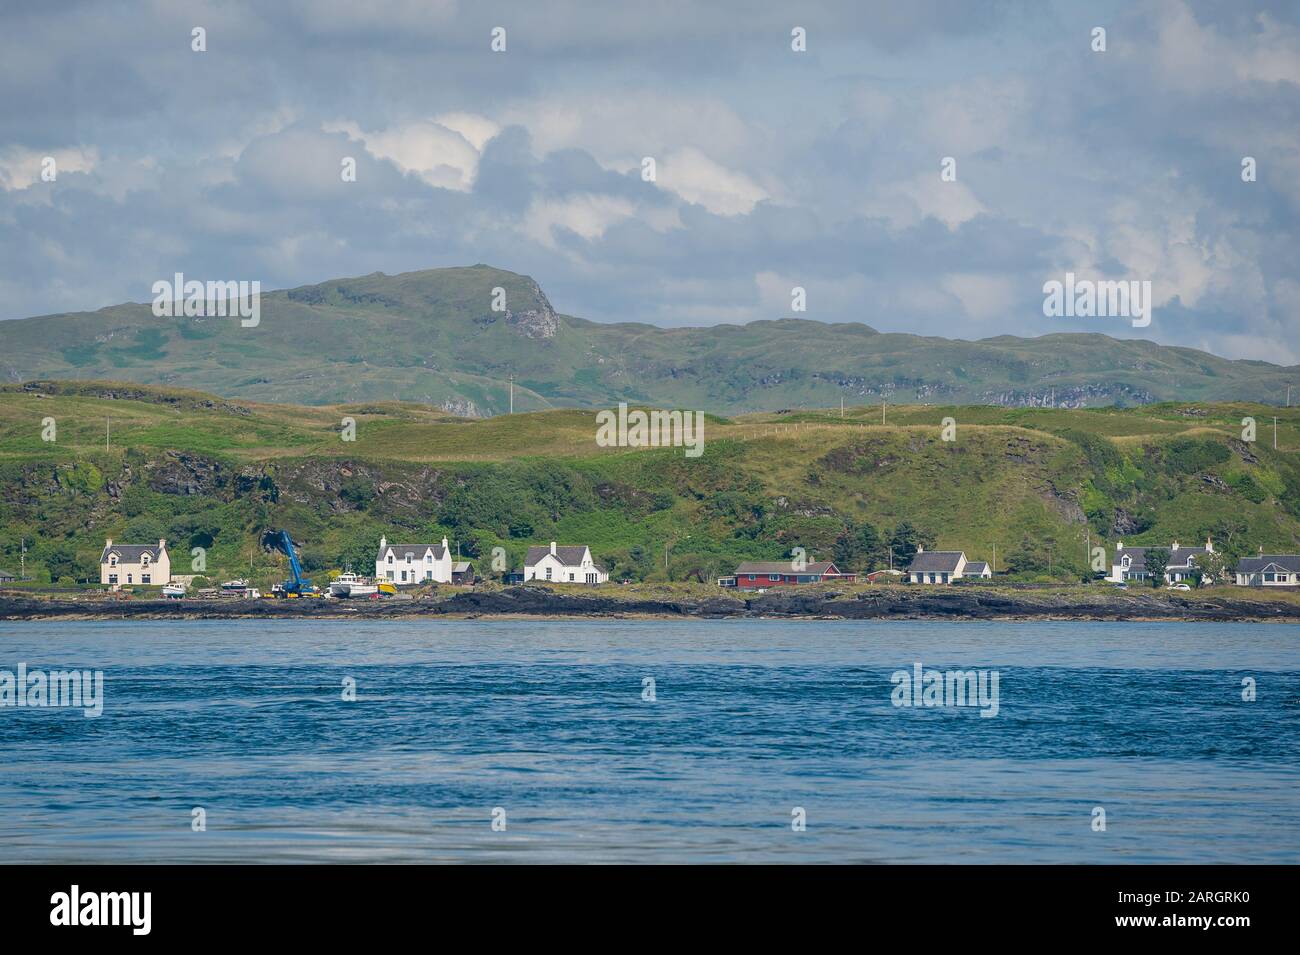 Village at Scotland shore view from the water. Typical rural landscape of Hebrides islands. Stock Photo